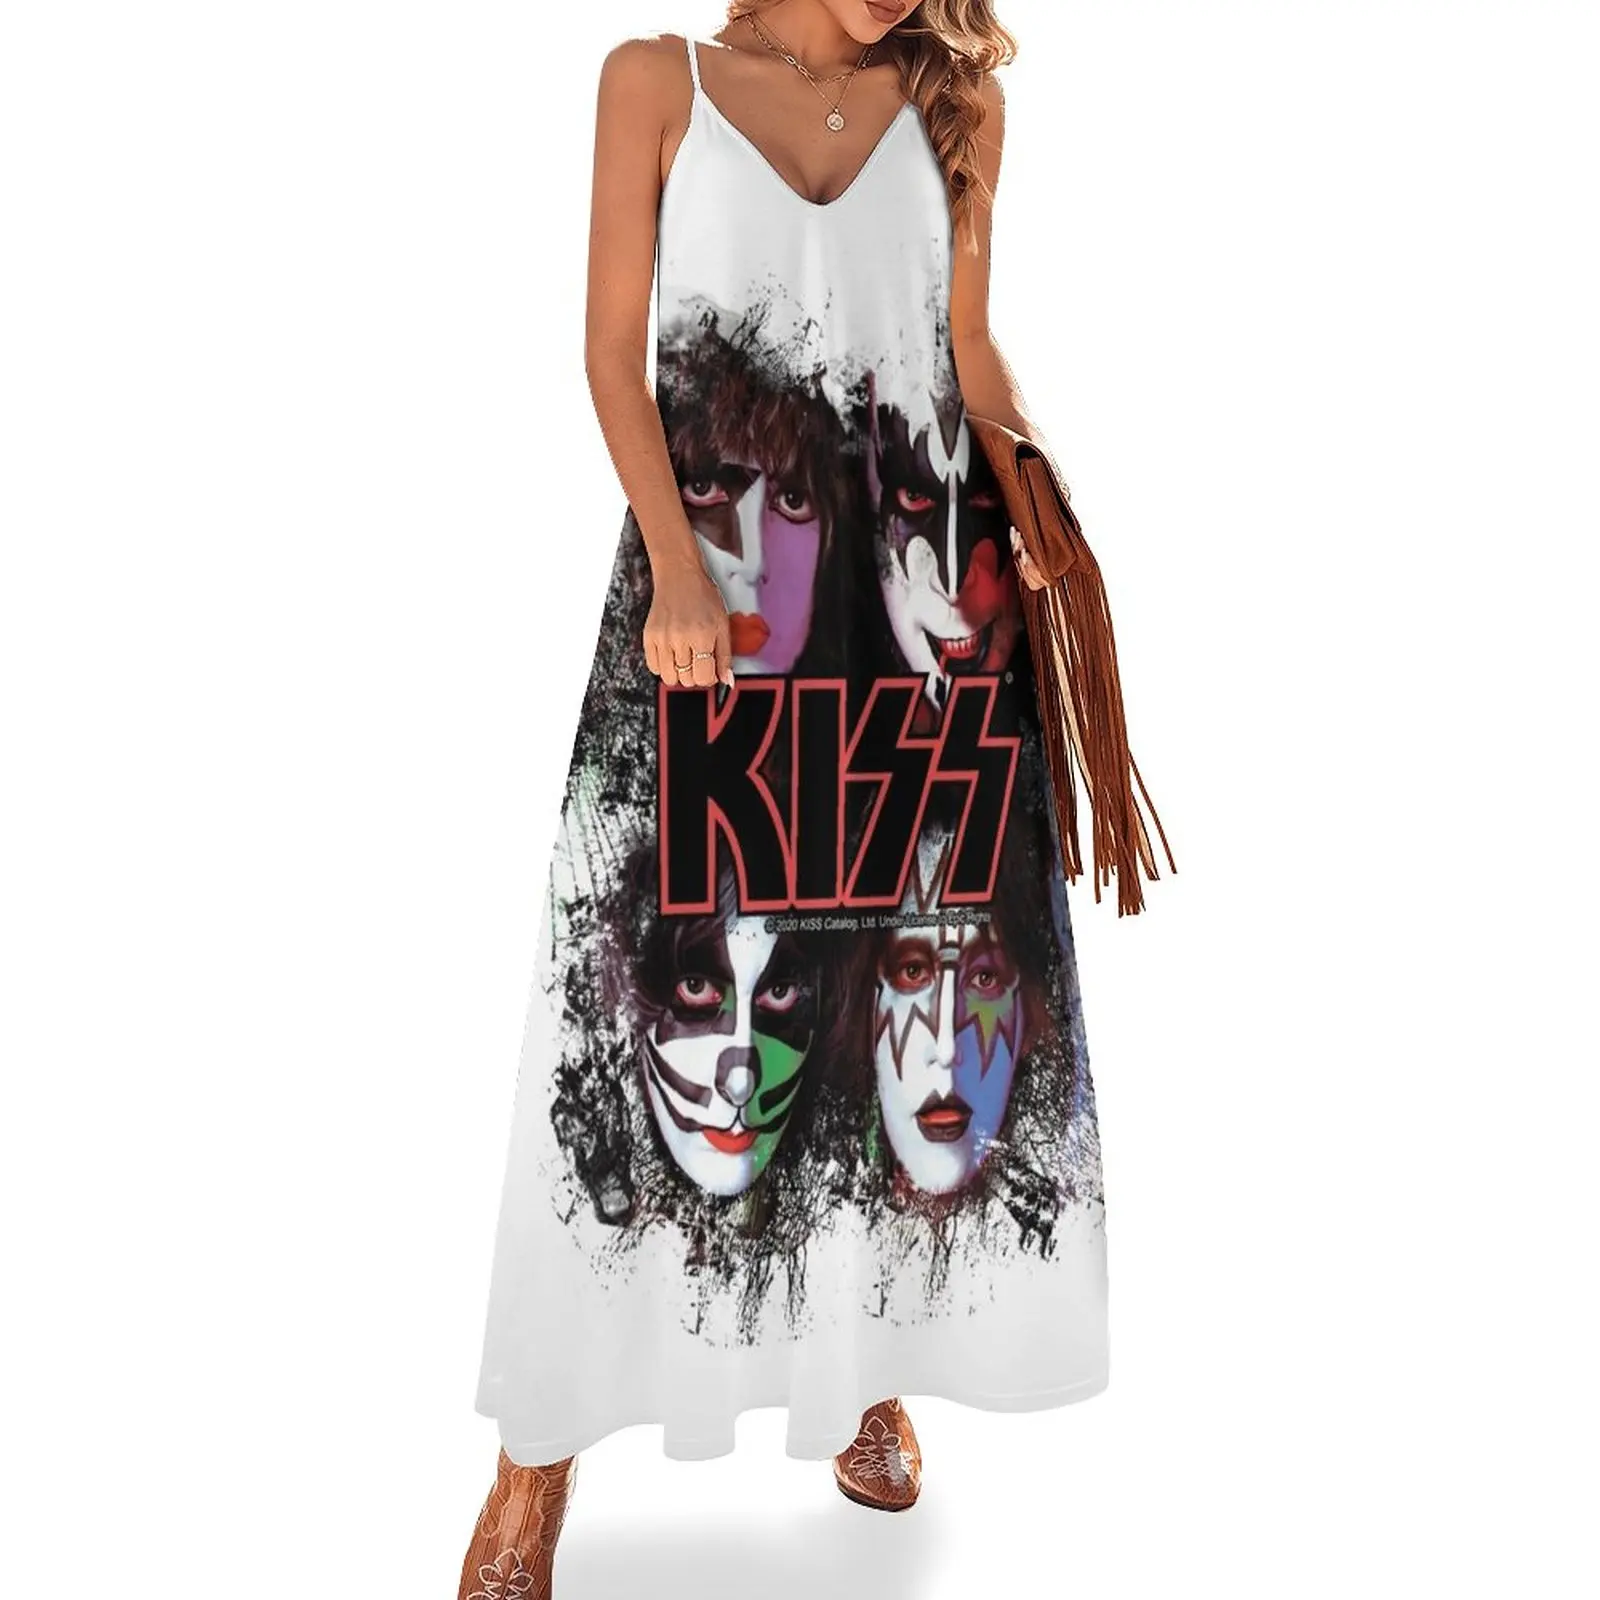 

KISS  the Band - All Members Faces brush effect Sleeveless Dress Party dresses